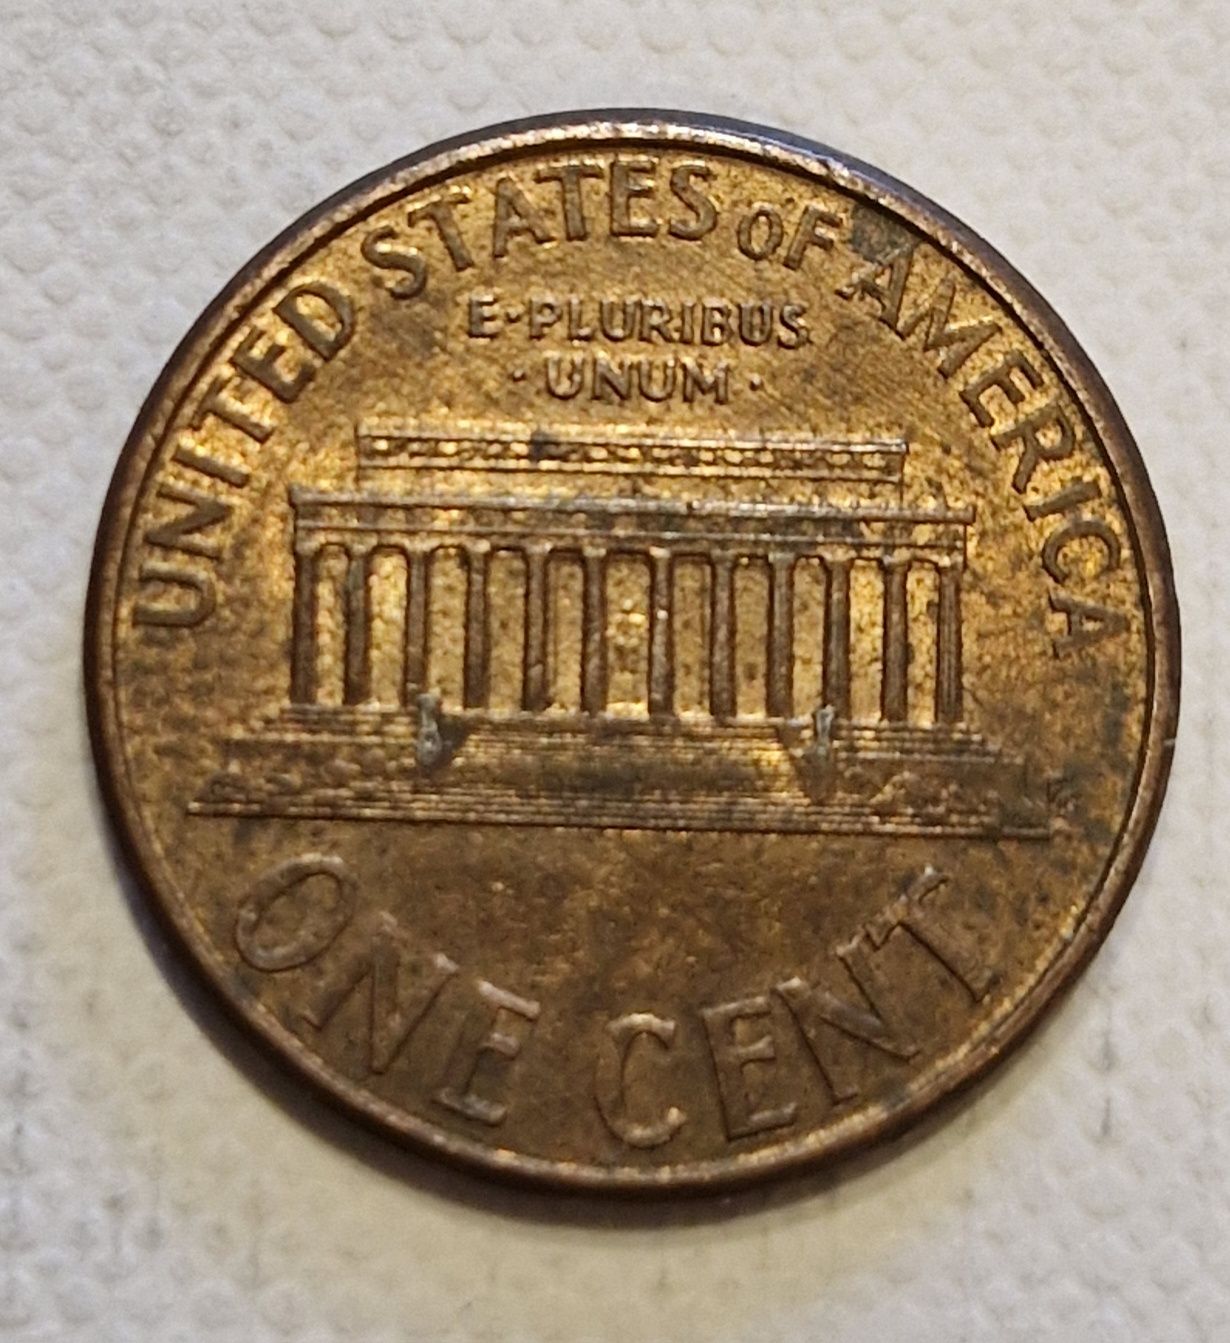 1 cent 2003 Lincoln.